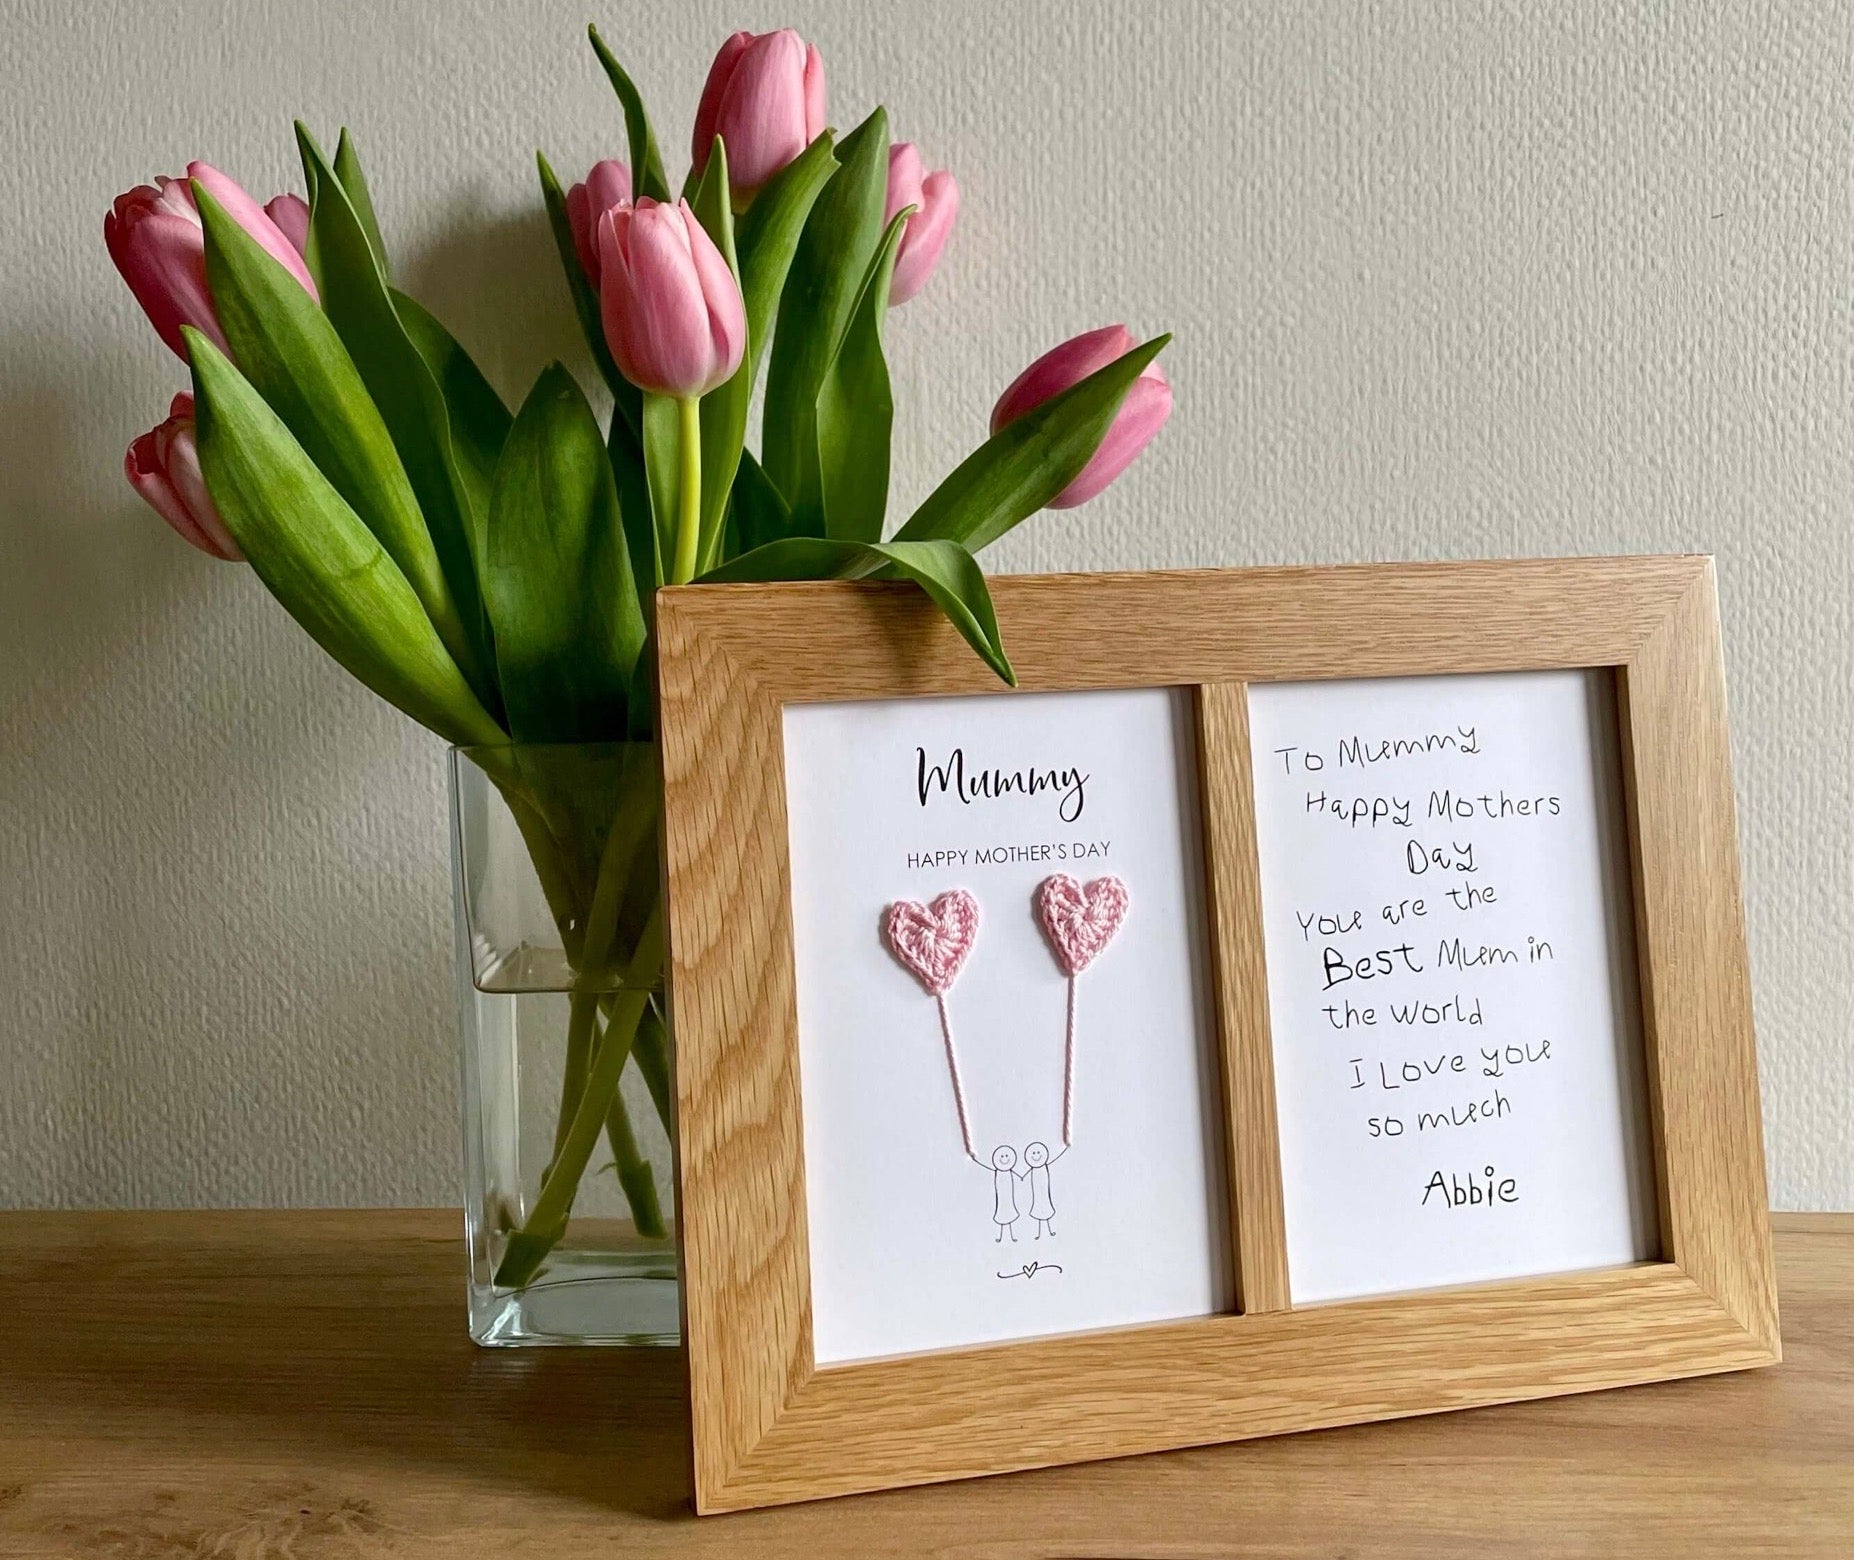 A Mothers day card featuring two pale pink crochet hearts has been framed in a double aperture oak frame. The front of the card is framed on the left and on the right is the heartfelt handwritten message from the child. The frame is placed next to a glass vase of pink tulips.